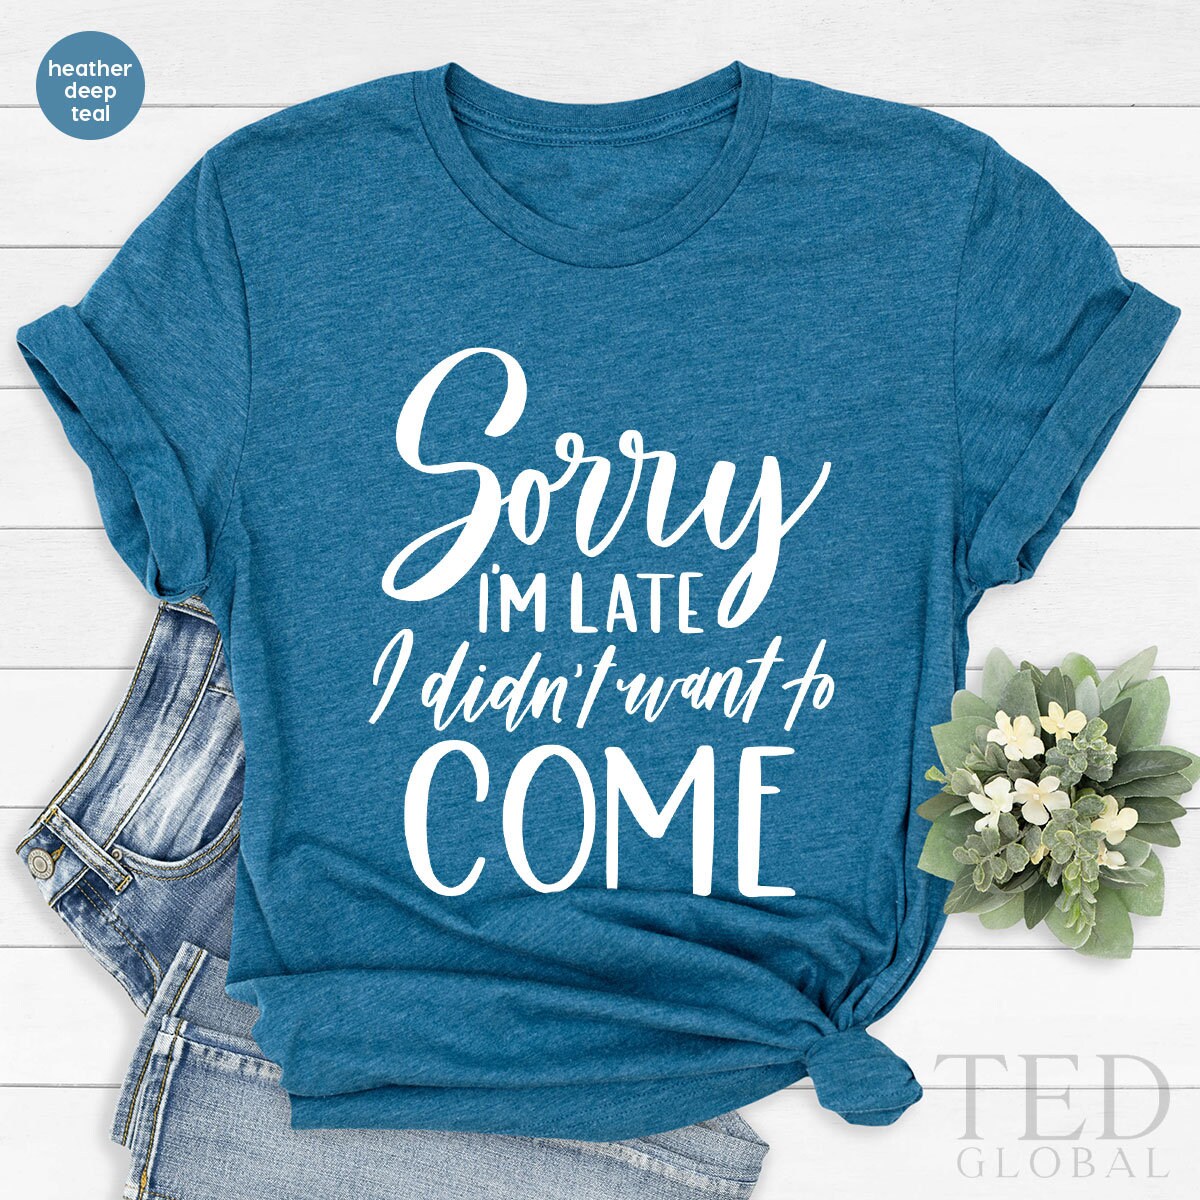 Funny Quote Shirt, Funny Sarcastic Tee, Humorous Tshirt, Adult Humor Shirt, Introvert Gift, Sorry Im Late I Didnt Want to Come,Sassy T Shirt